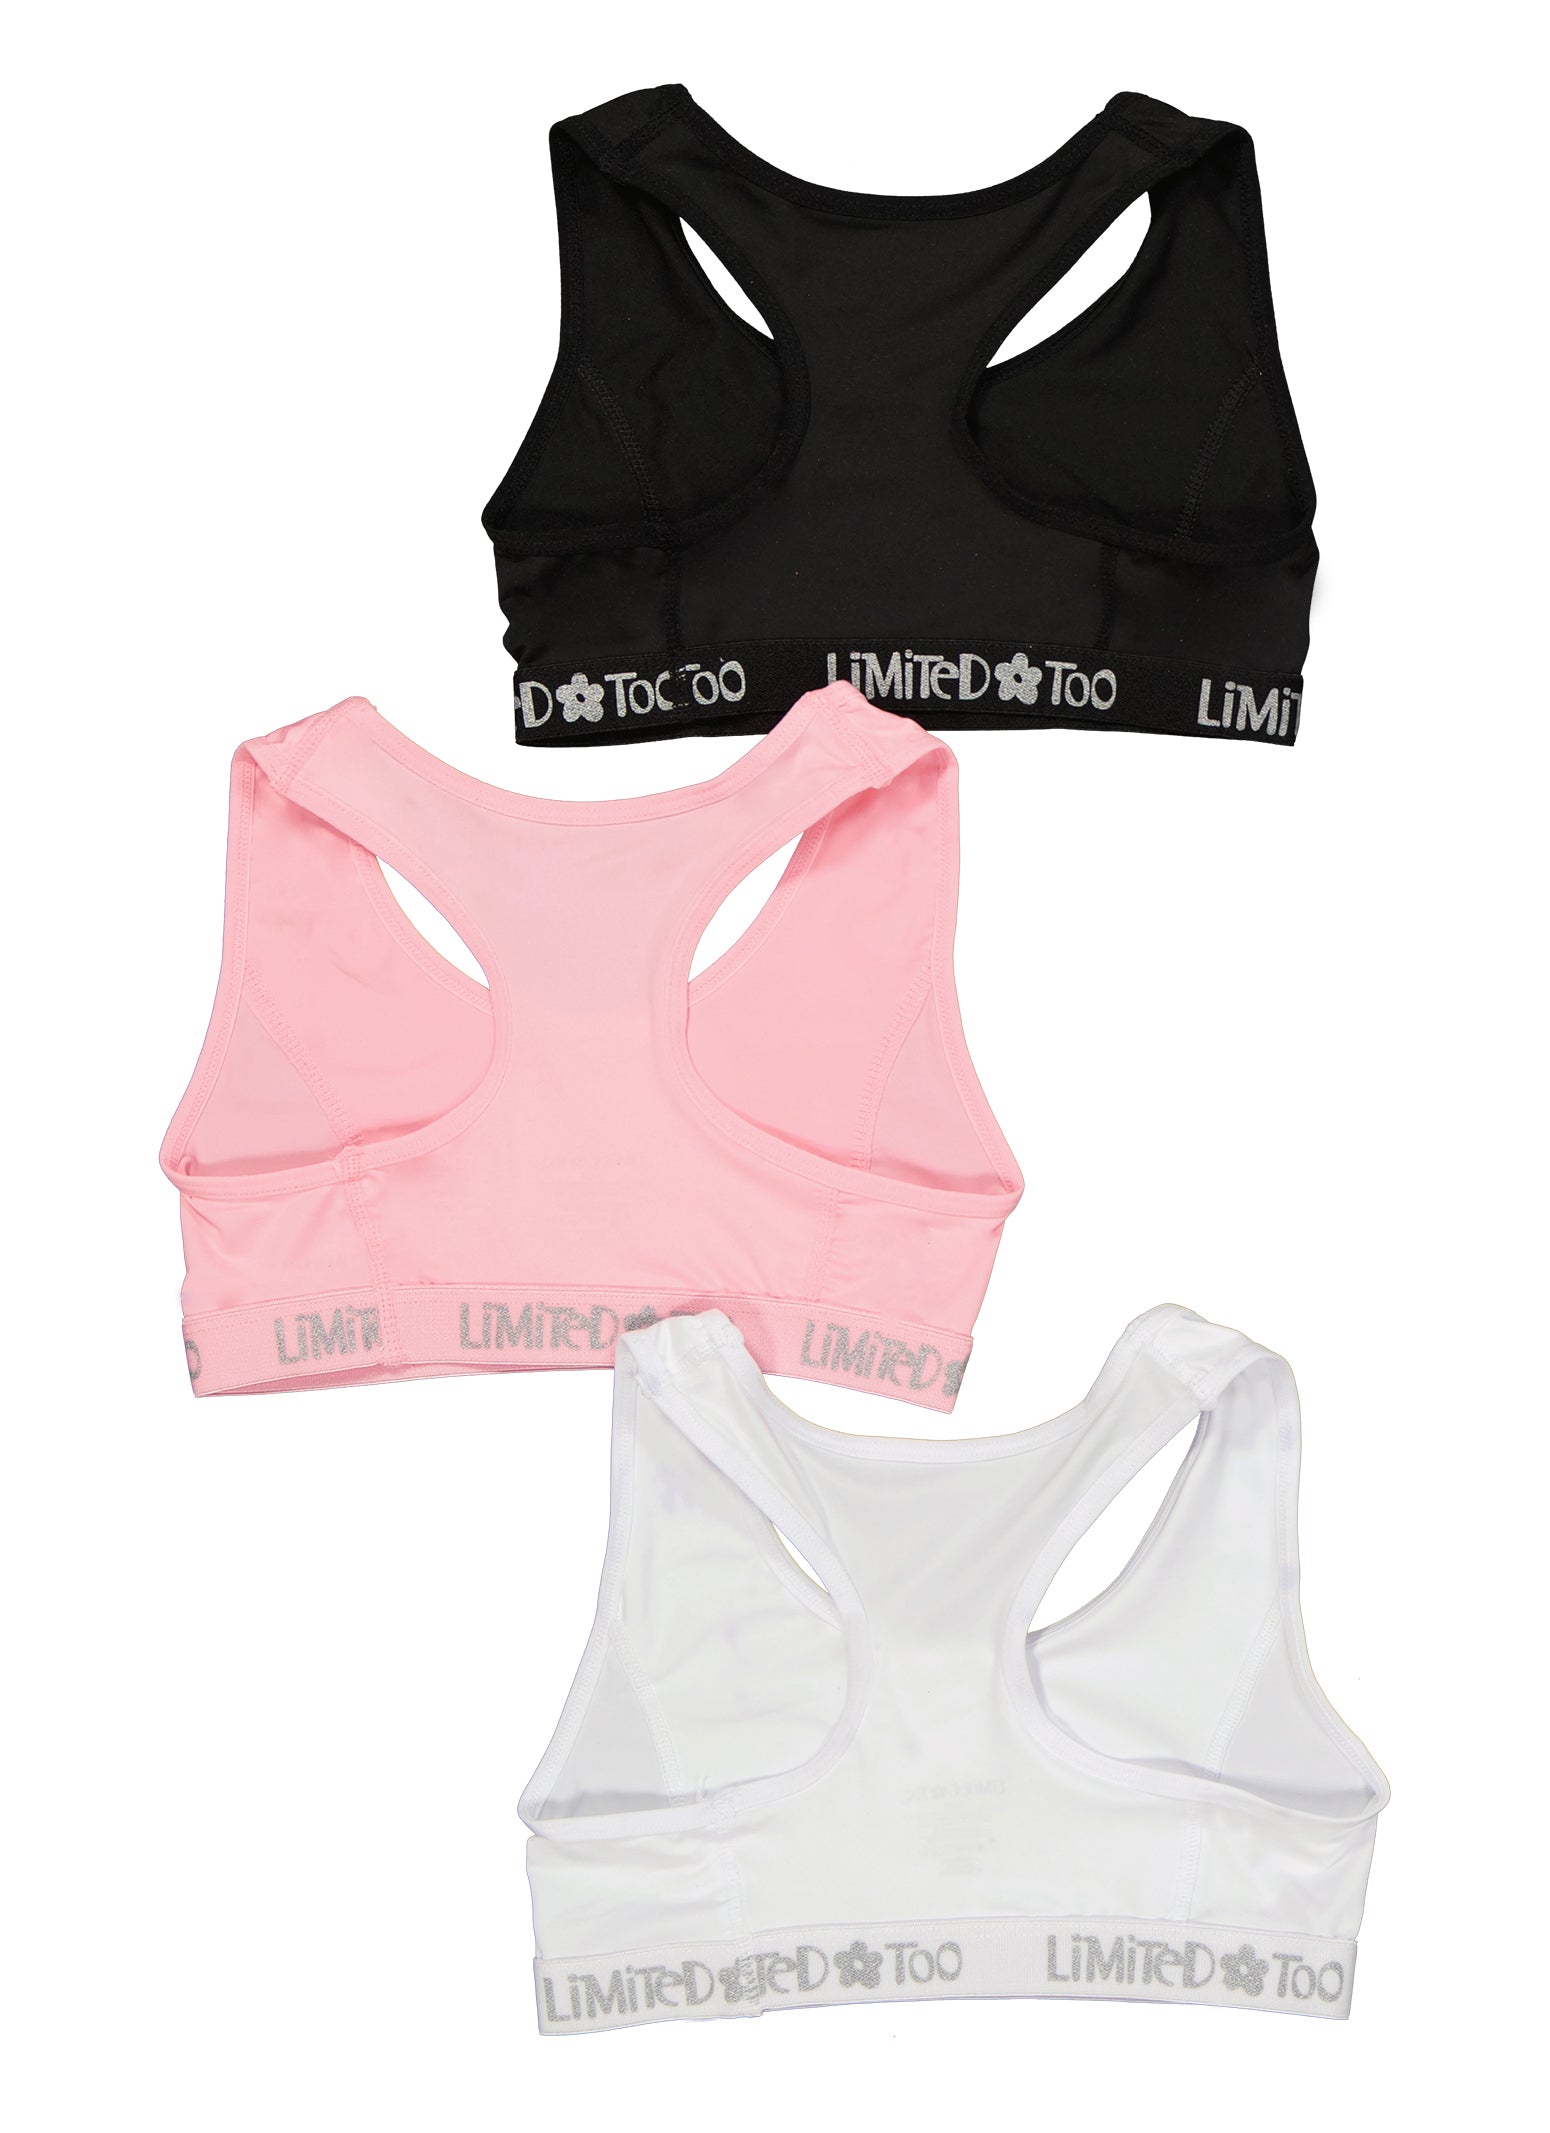 Girls Limited Too 3 Pack Sports Bras - Multi Color